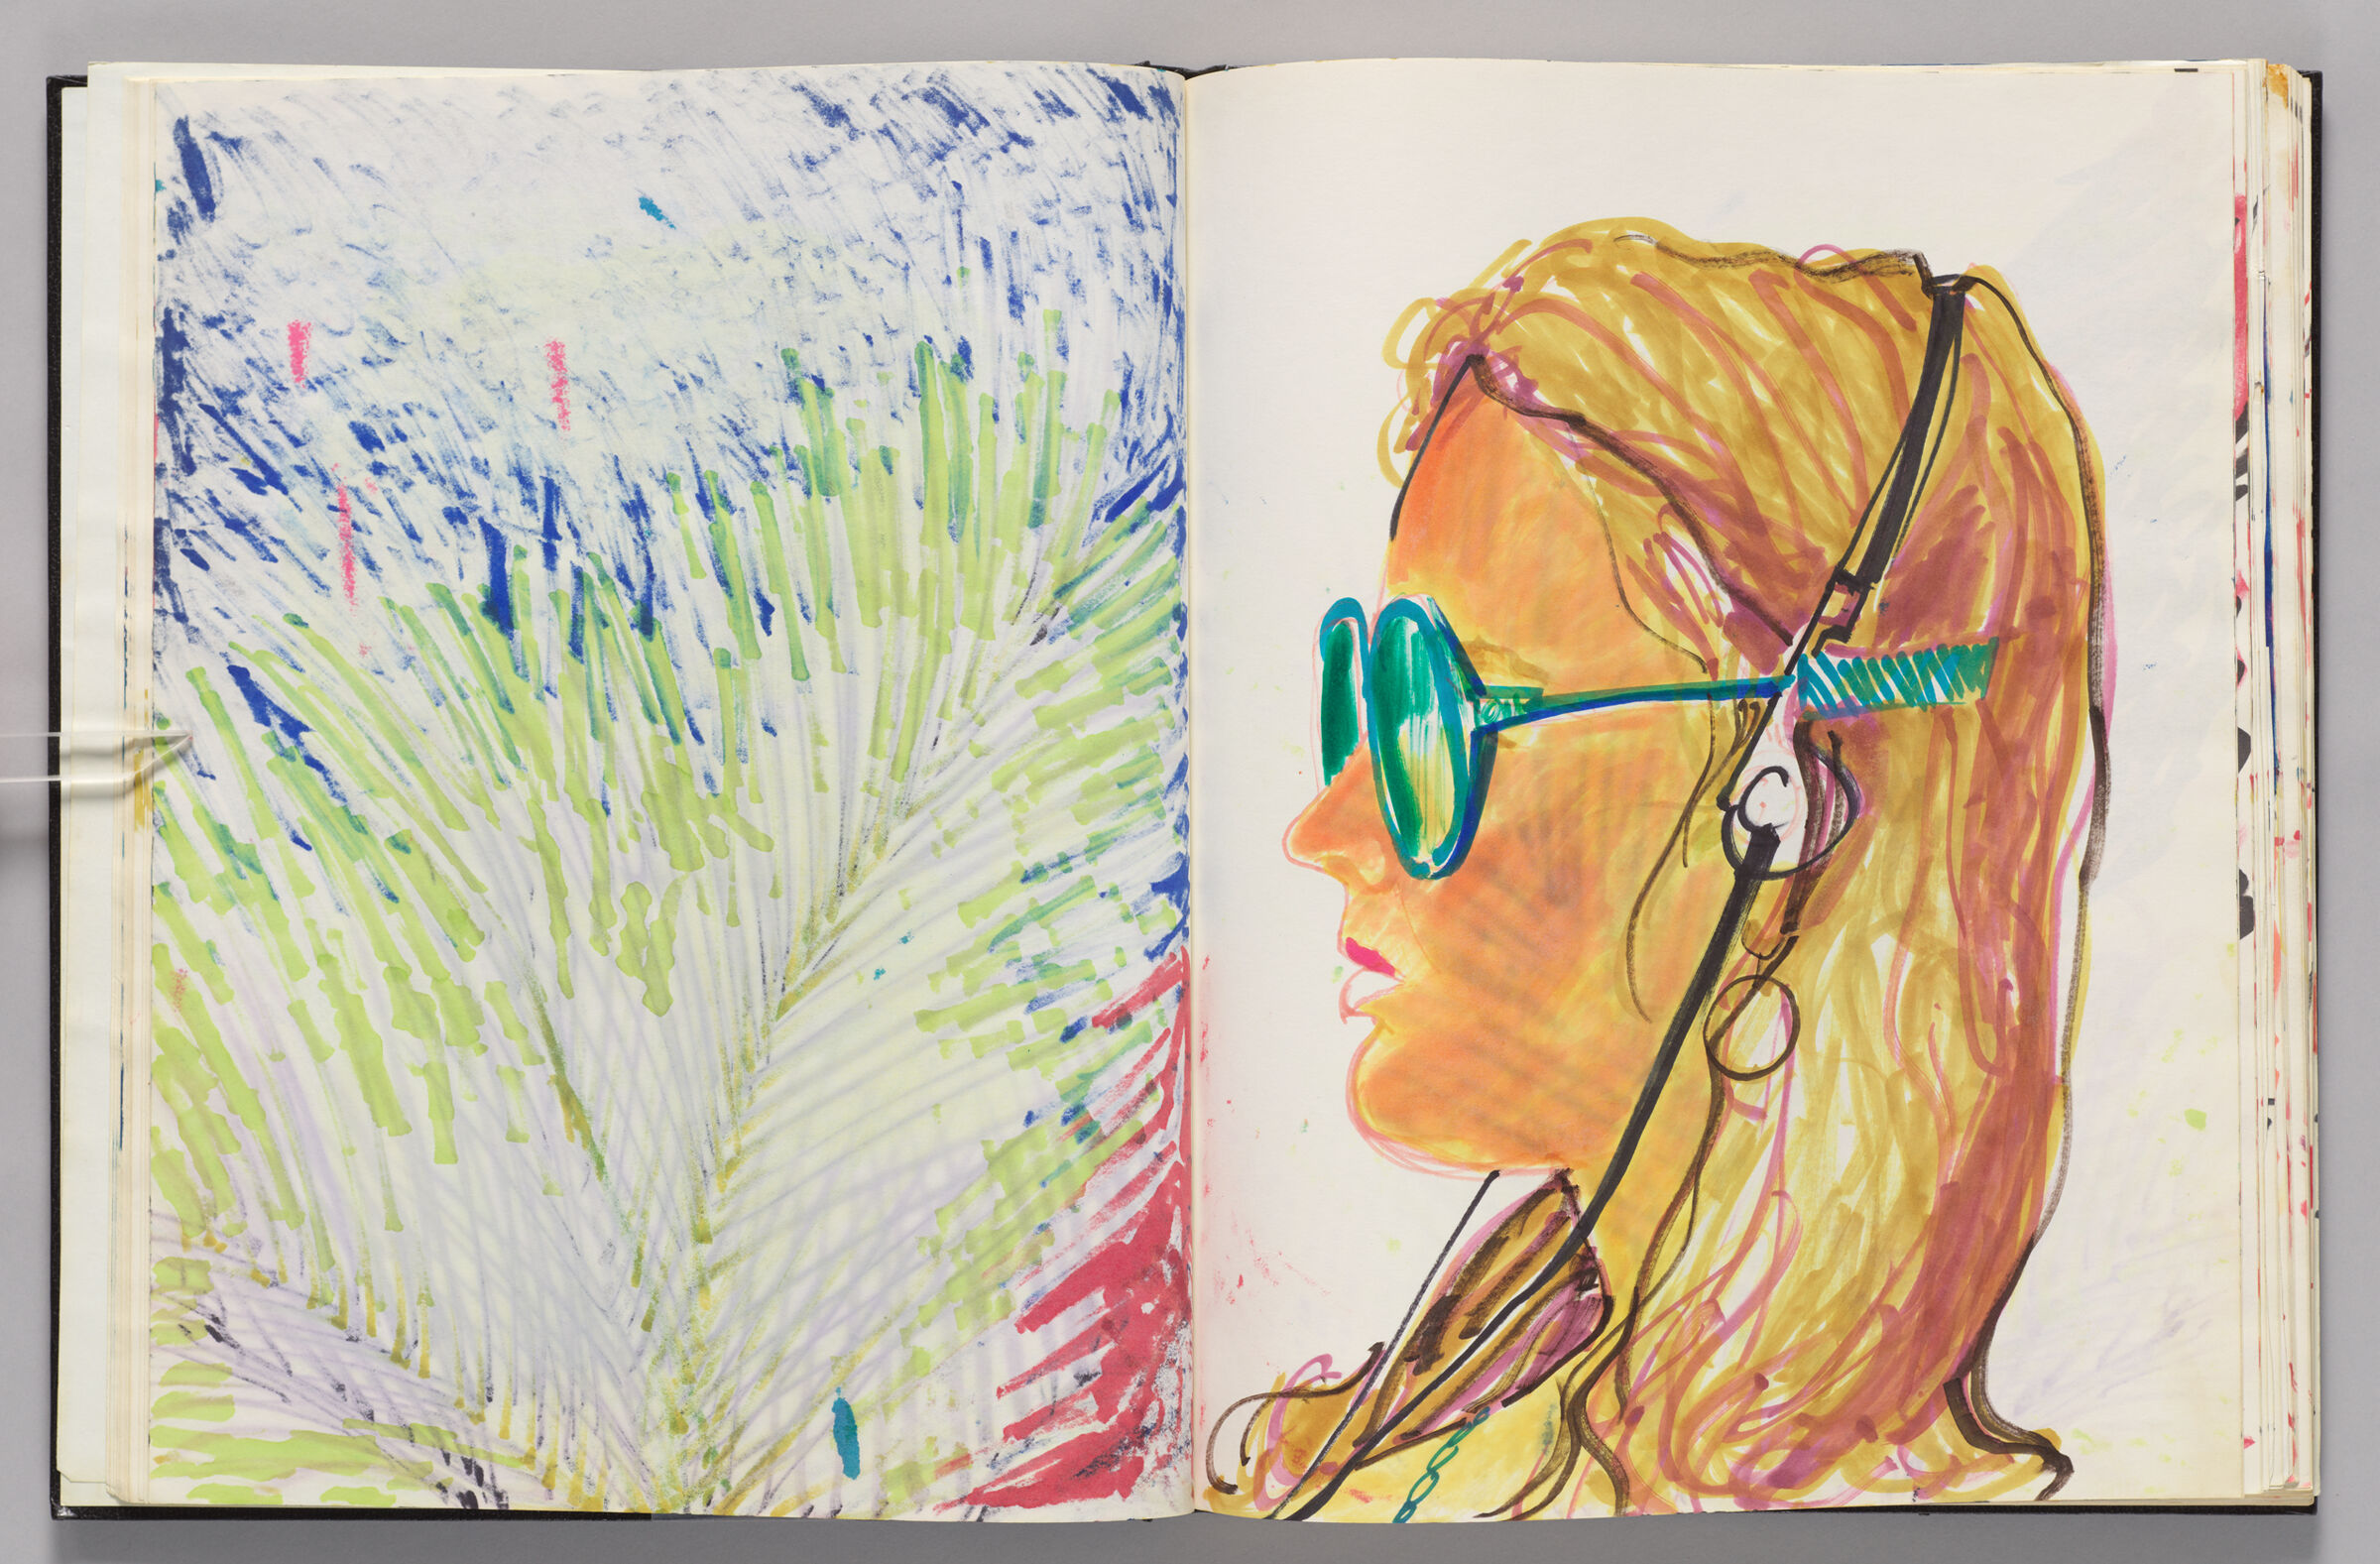 Untitled (Bleed-Through Of Previous Page, Left Page); Untitled (Profile Portrait Of Female Figure (Elizabeth Goldring) With Headphones And Sunglasses, Right Page)